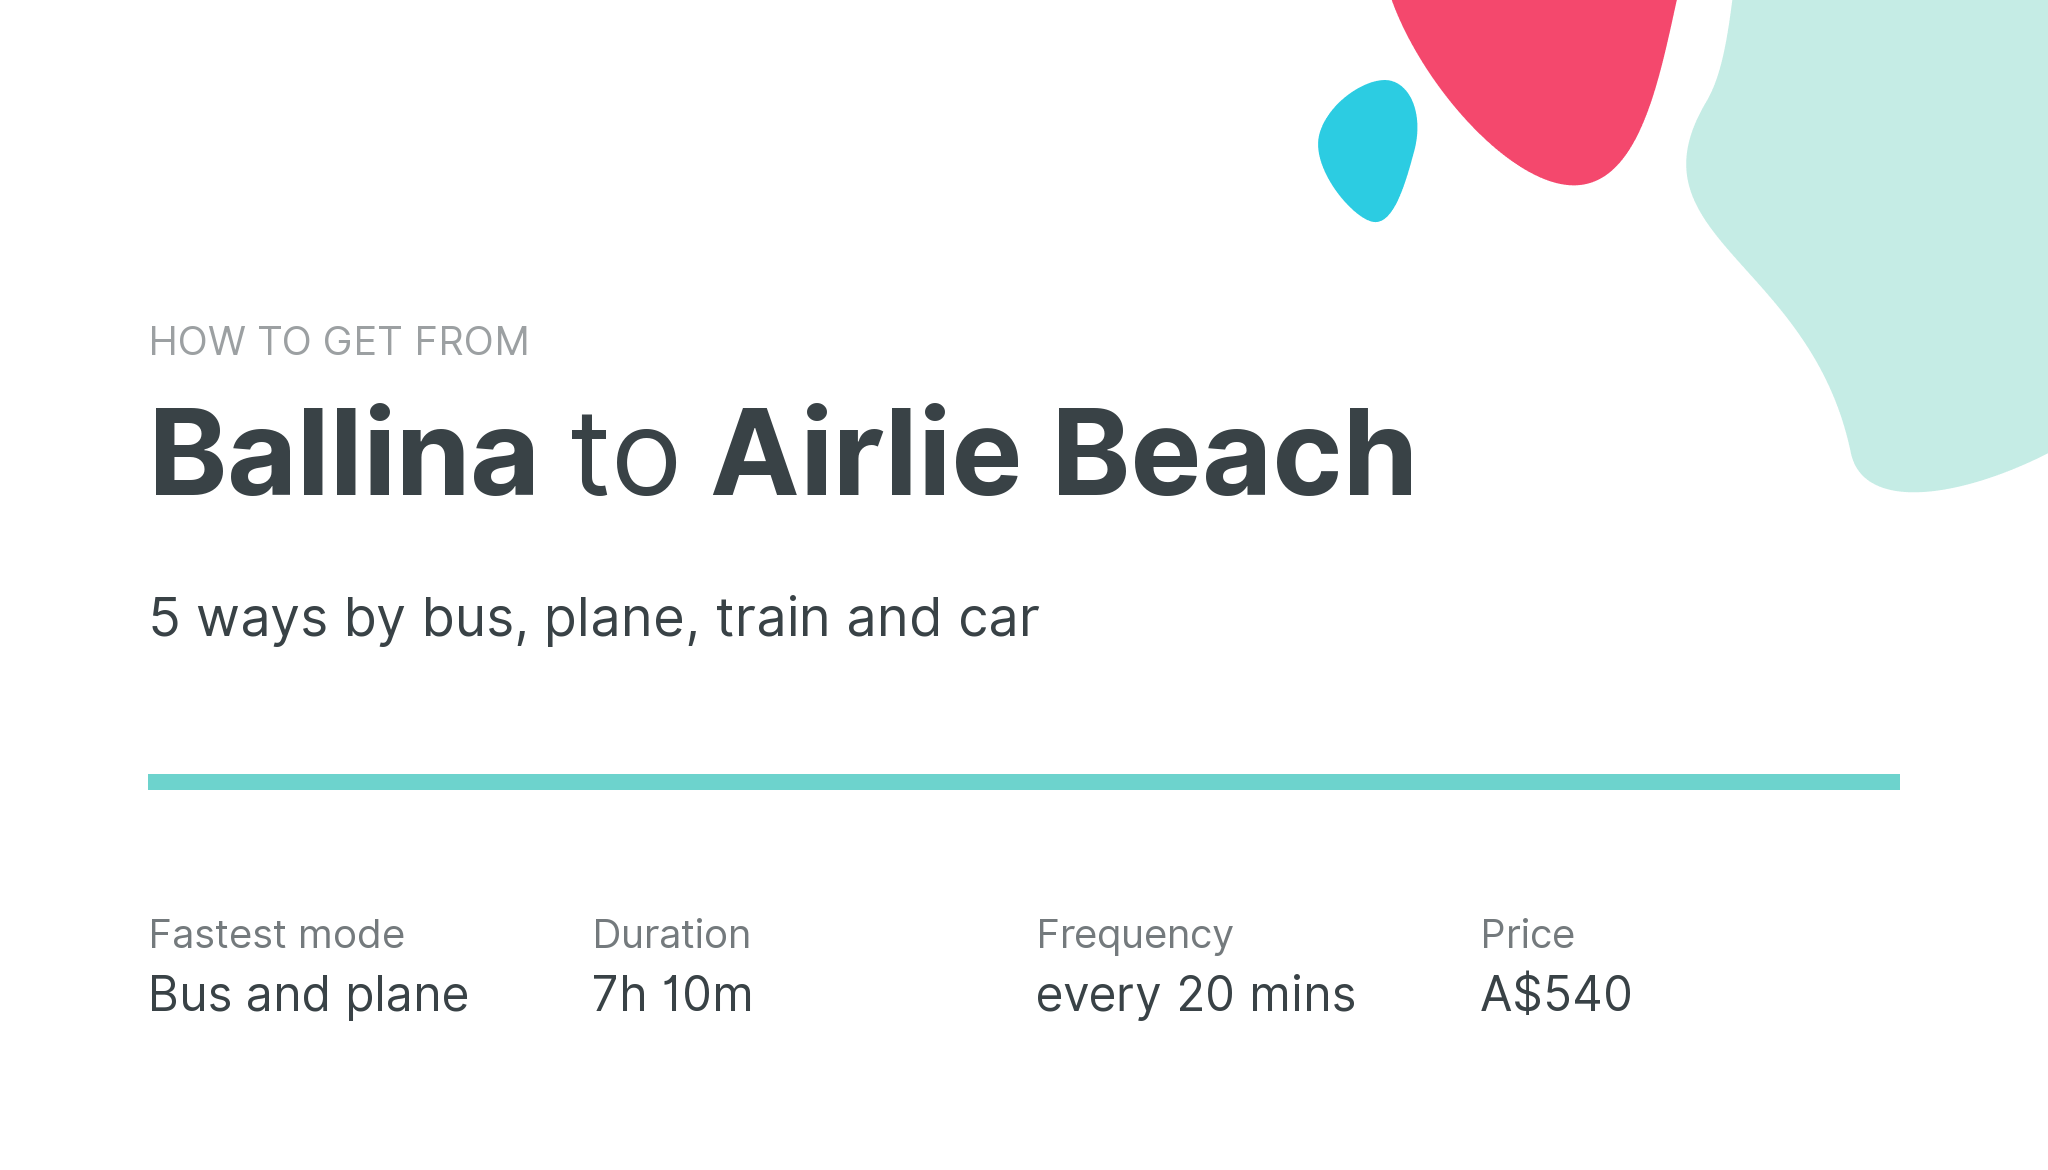 How do I get from Ballina to Airlie Beach